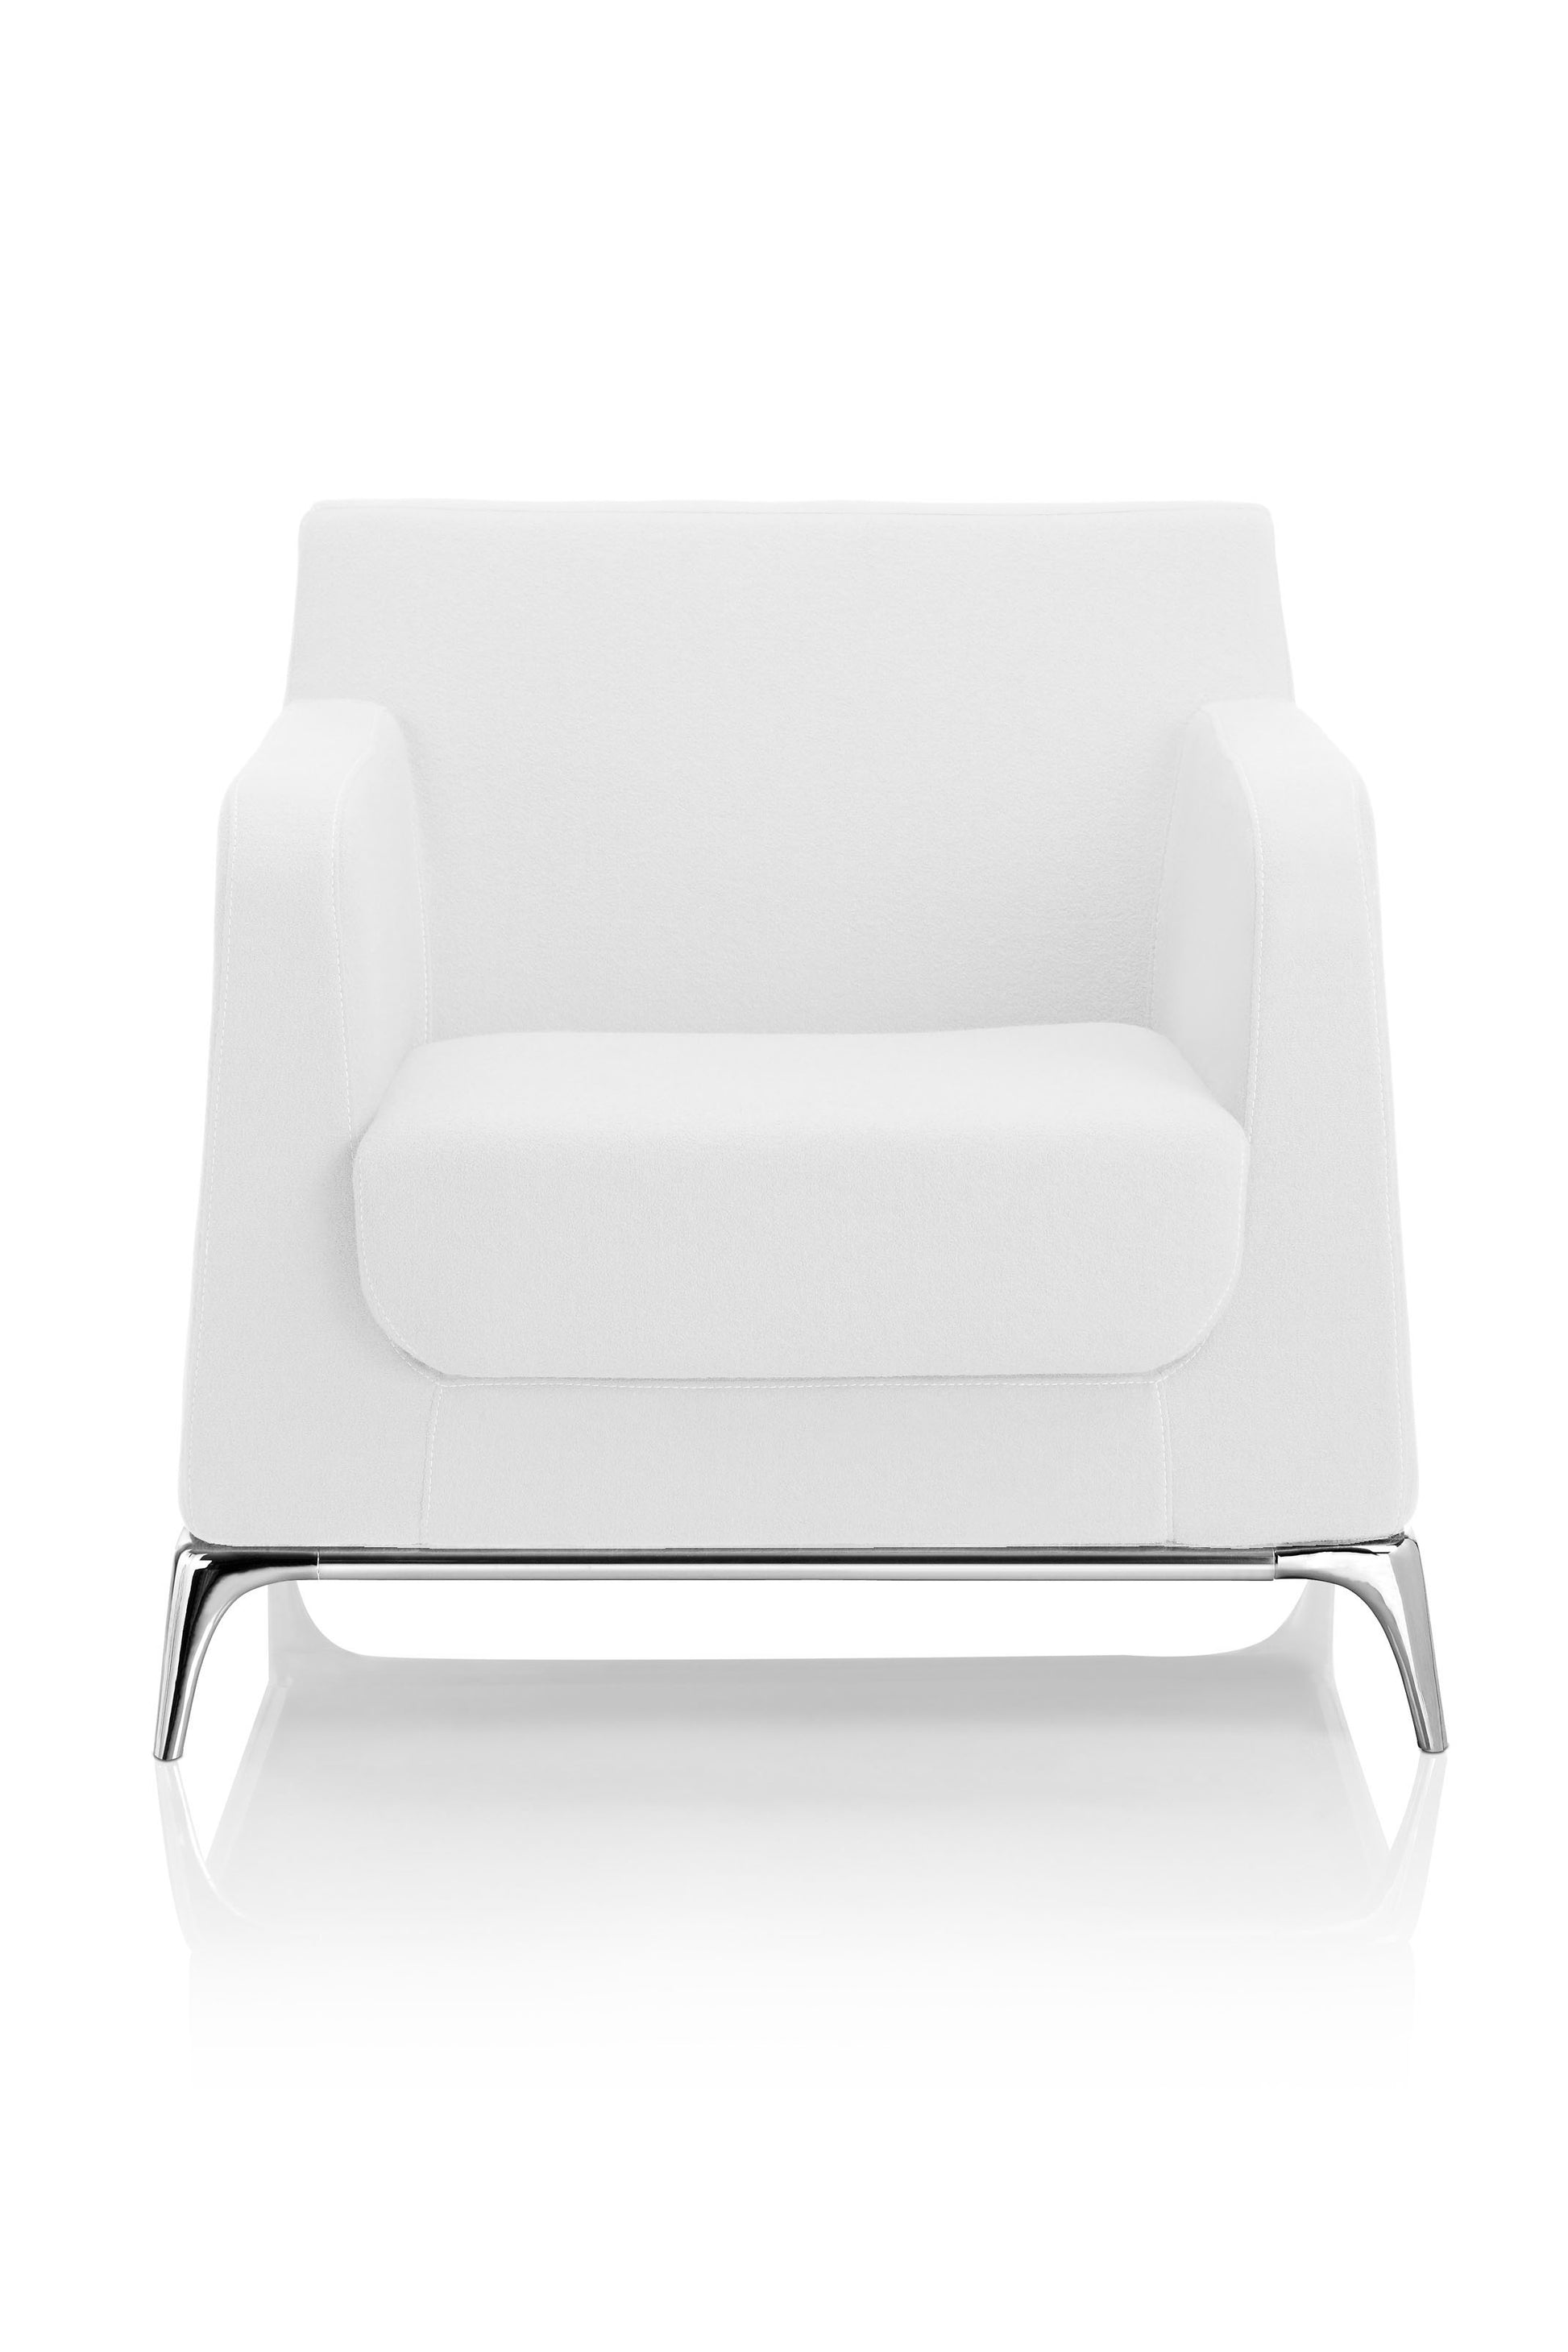 Bison Armchair - BAFCO